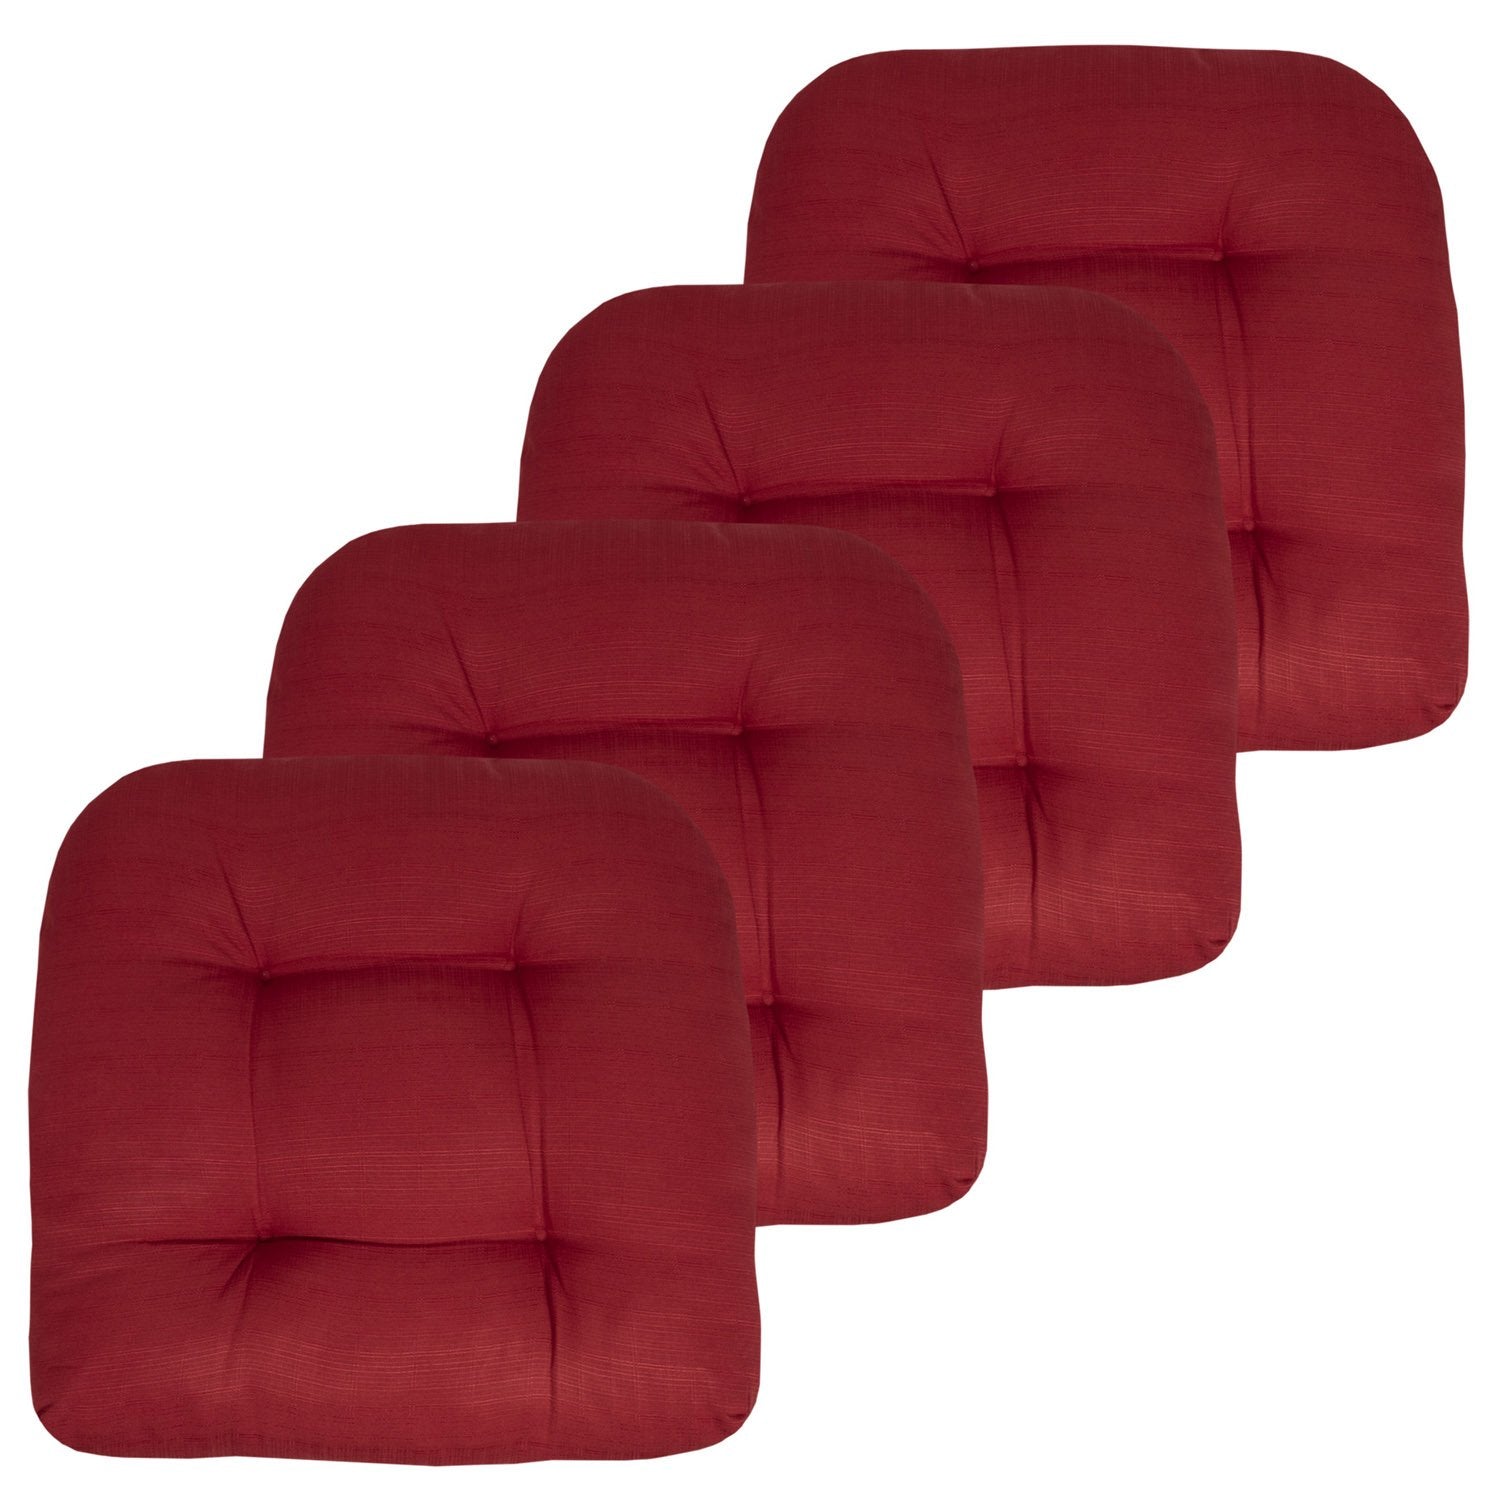 Patio Seat Cushion Set Red 4-Pack